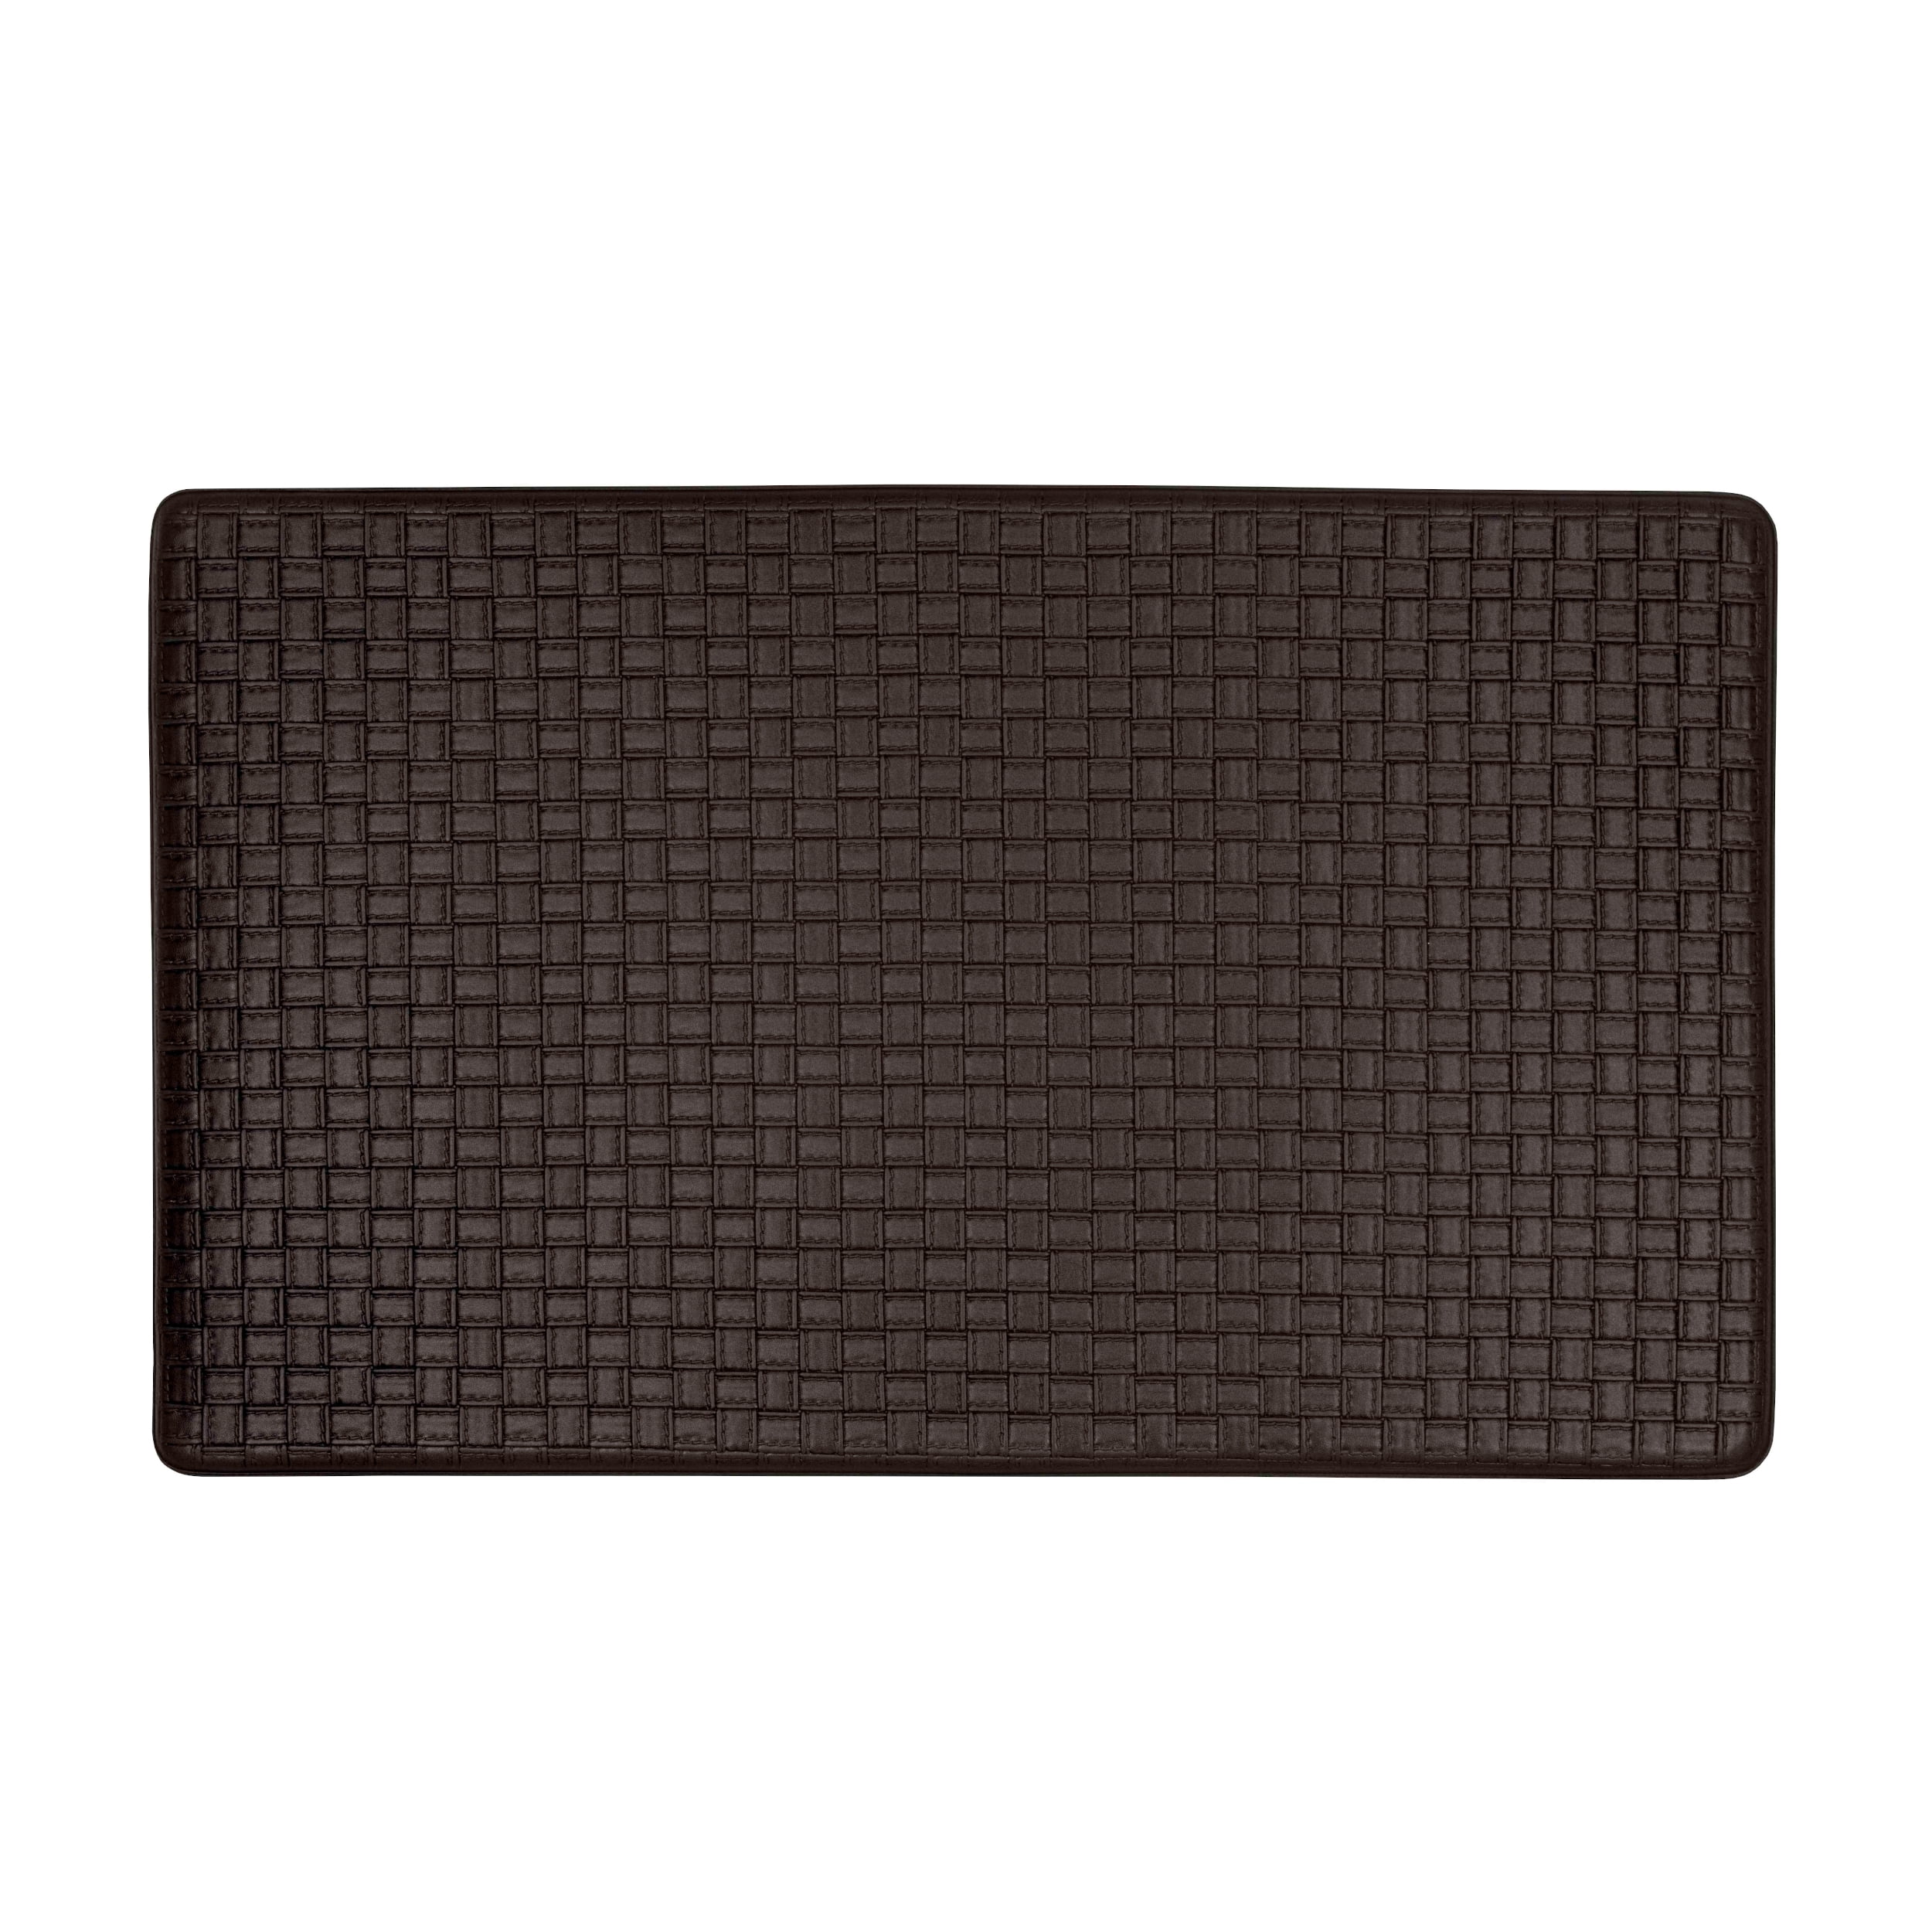 Picture of Achim AF1830BK12 18 x 30 in. Woven-Embossed Faux-Leather Anti-Fatigue Mat, Black